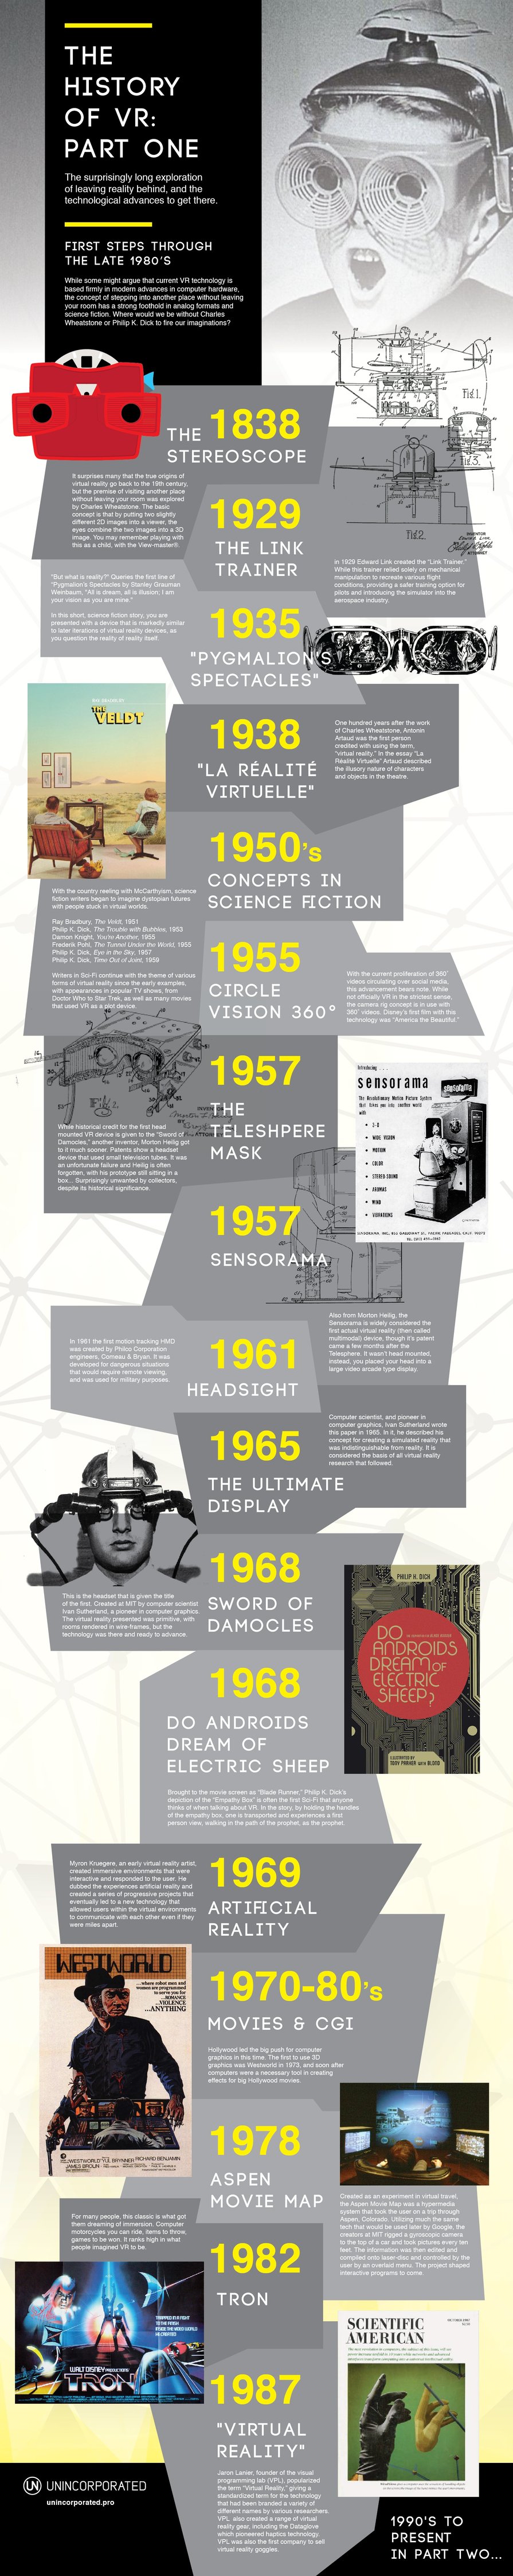 Virtual Reality Timeline Infographic